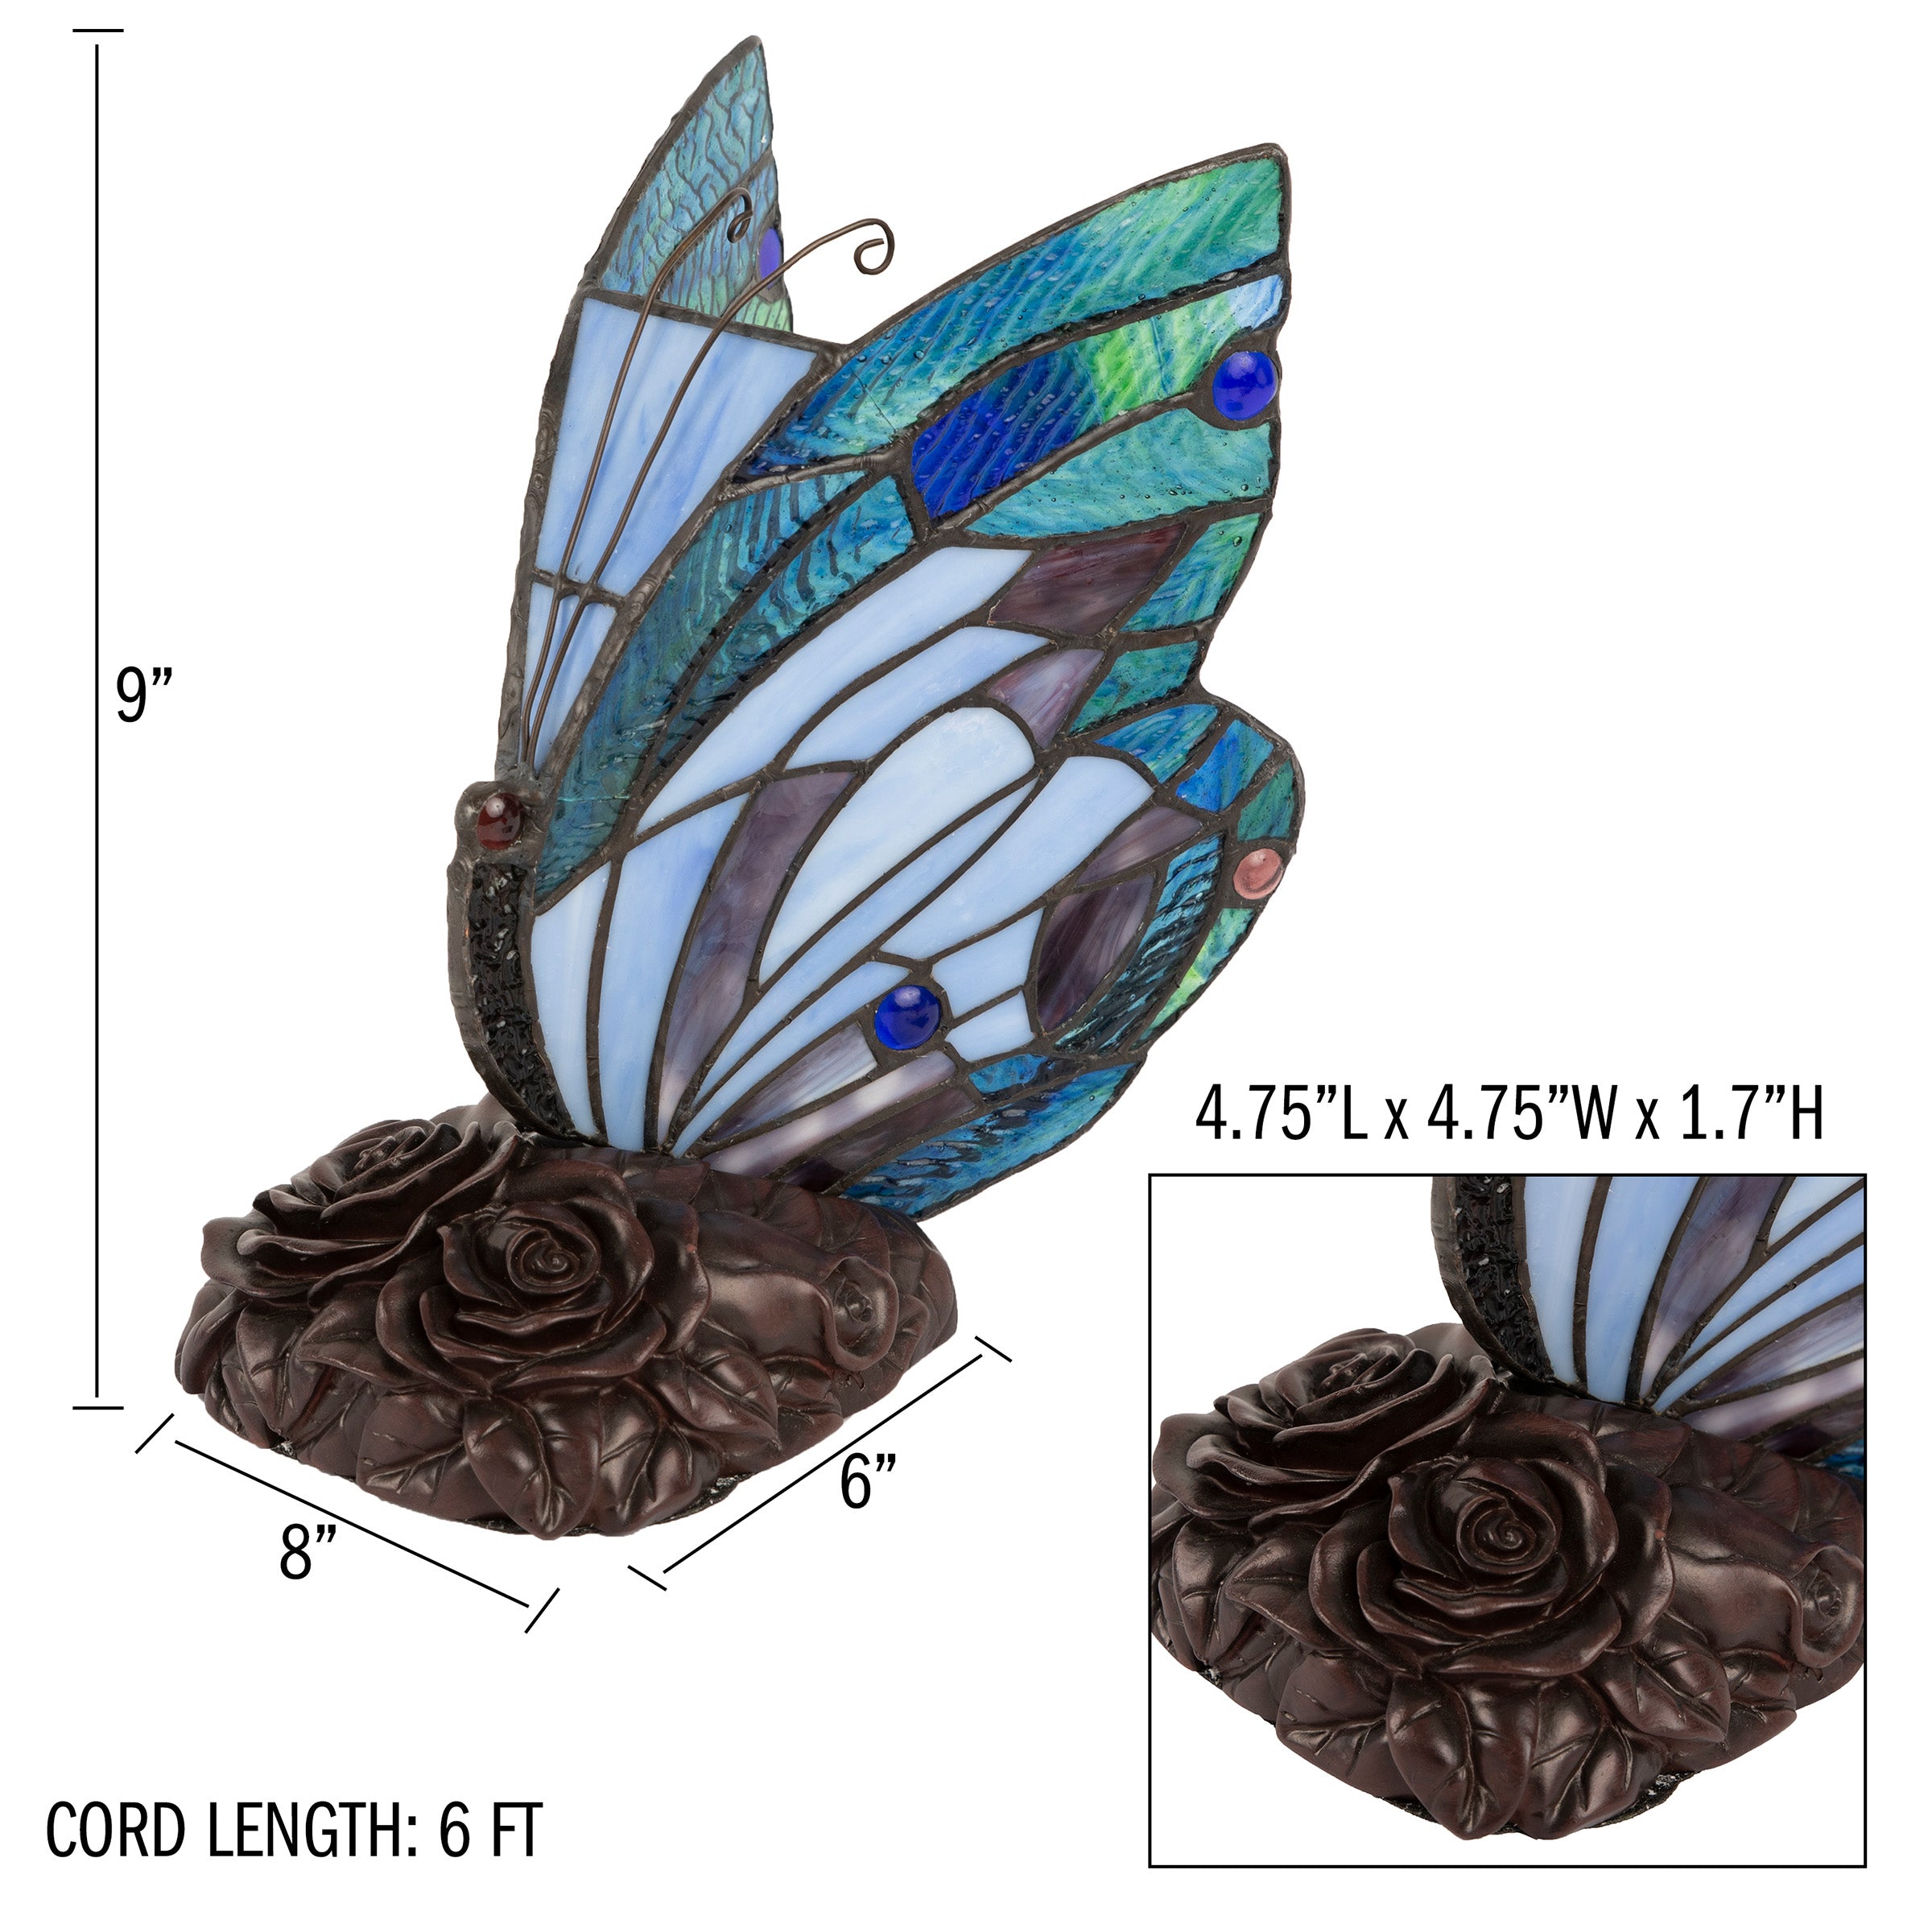  Style Butterfly Lamp-Stained Glass Table or Desk Light LED Bulb Included-Vintage Look Colorful Accent Décor by Lavish Home (Pointed Wings)